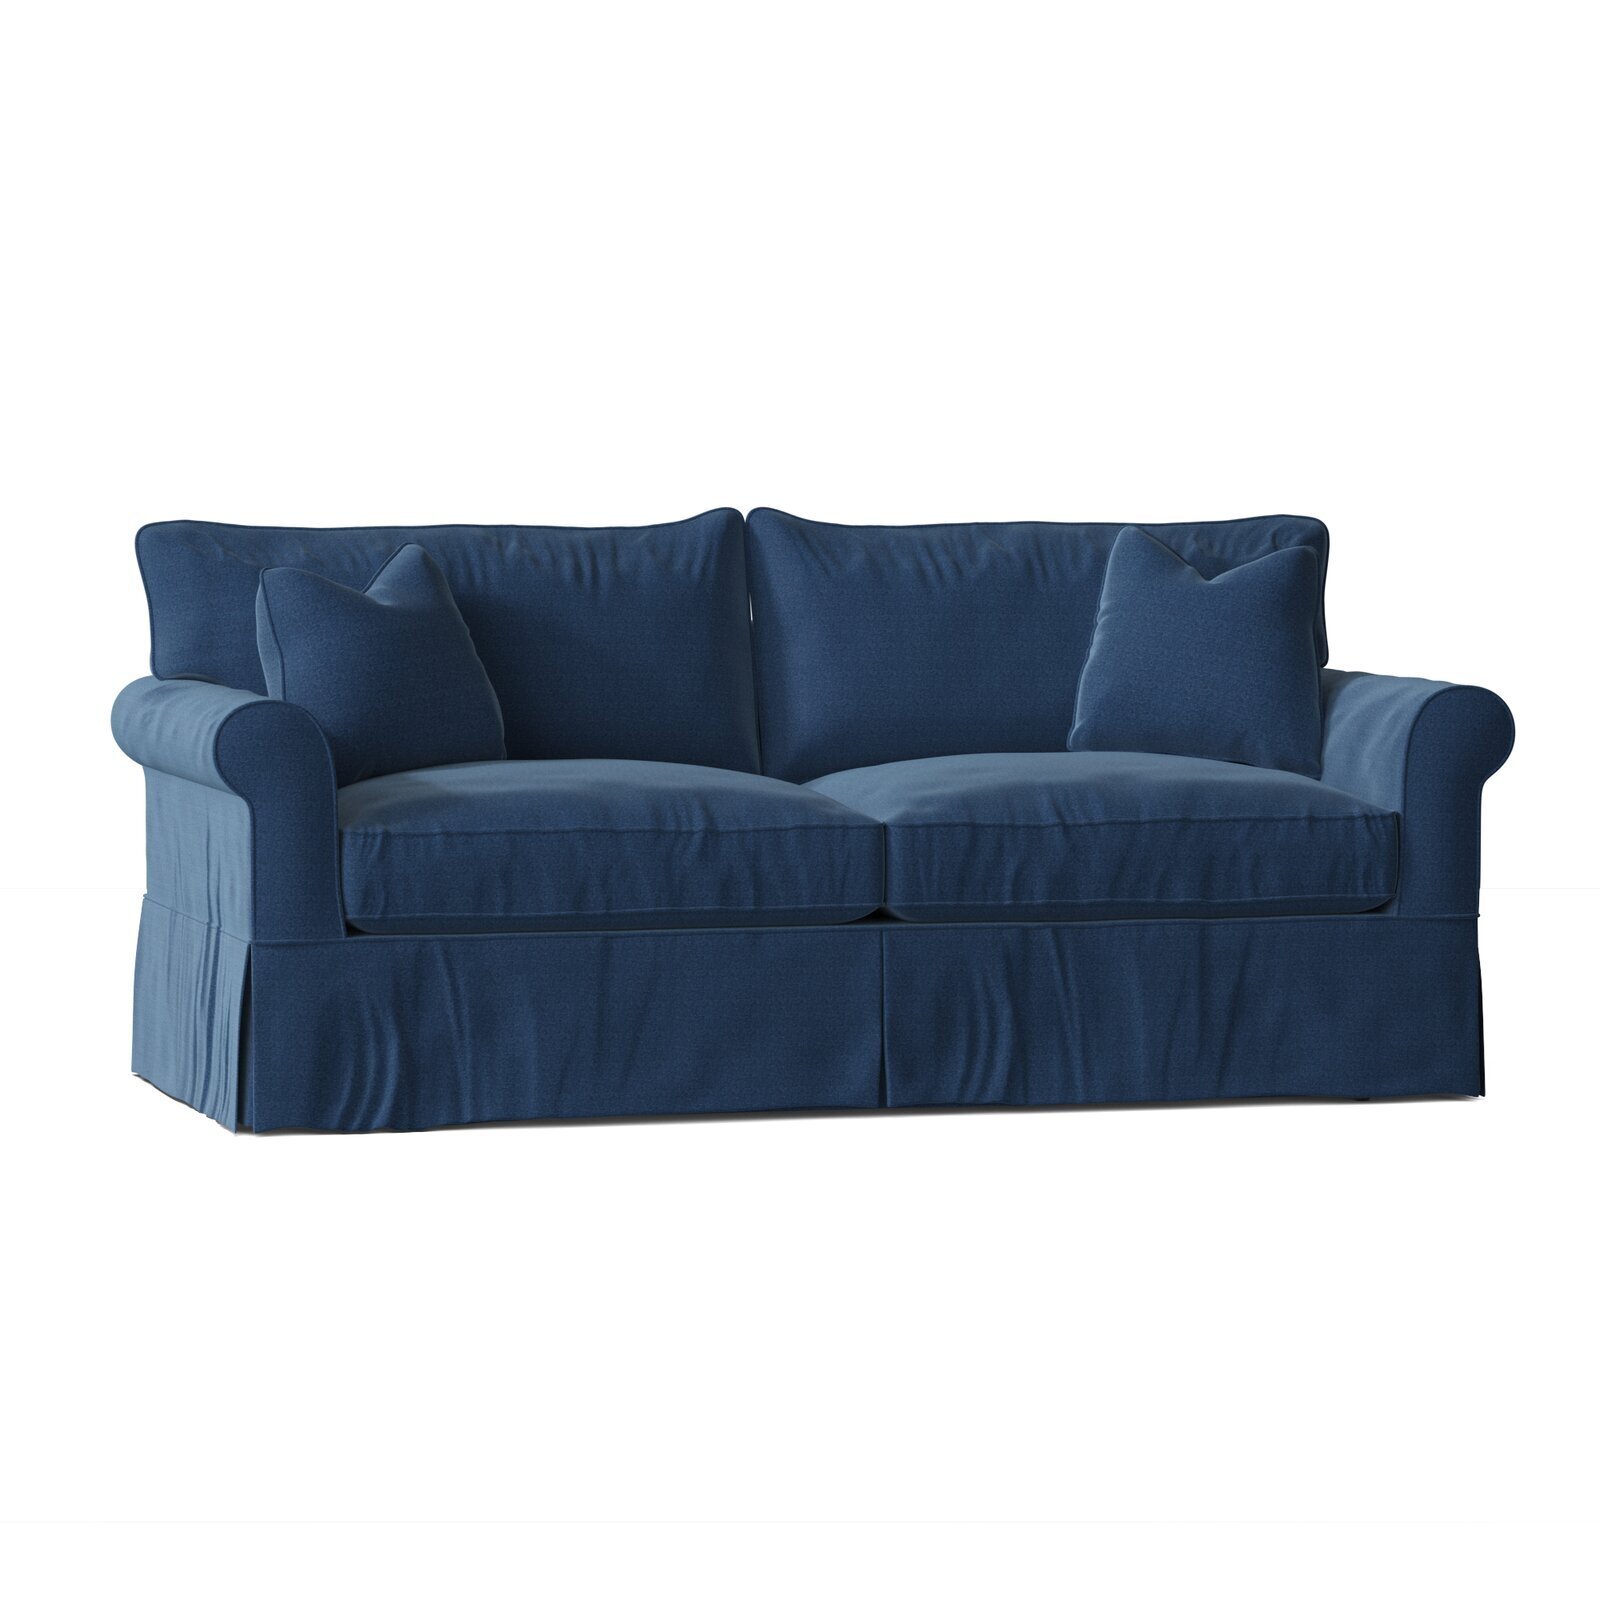 Blue Denim Chesterfield Sofas | Blue Vintage Couch Made from Jeans | Retro  sofa, Furniture, Comfy sofa chair